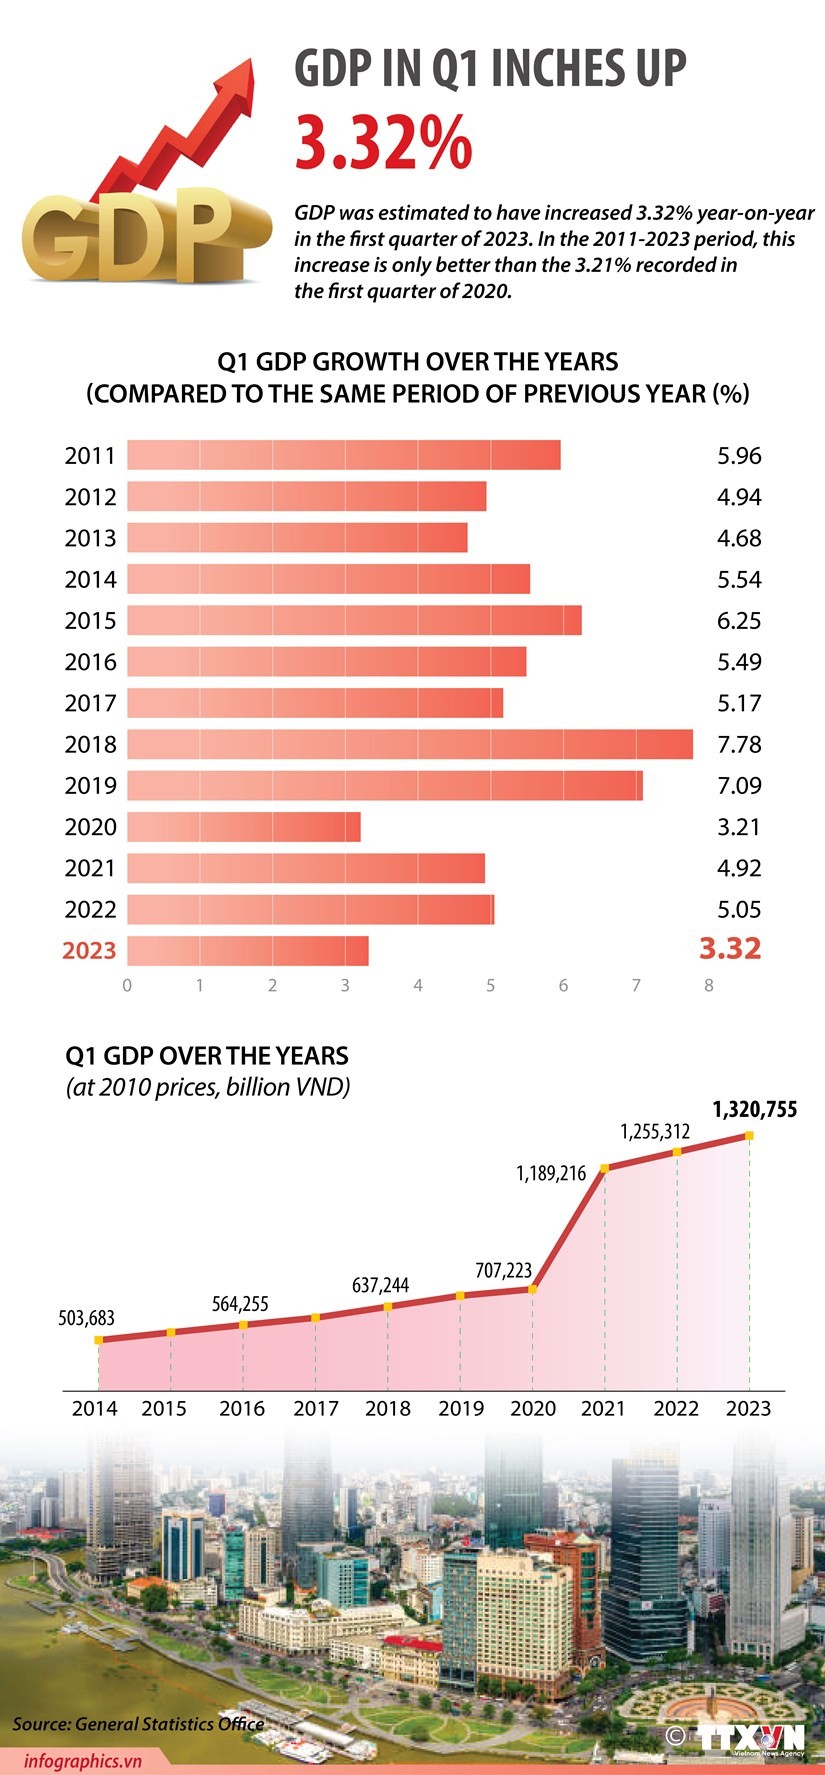 Infographic: GDP inches up 3.32% in Q1